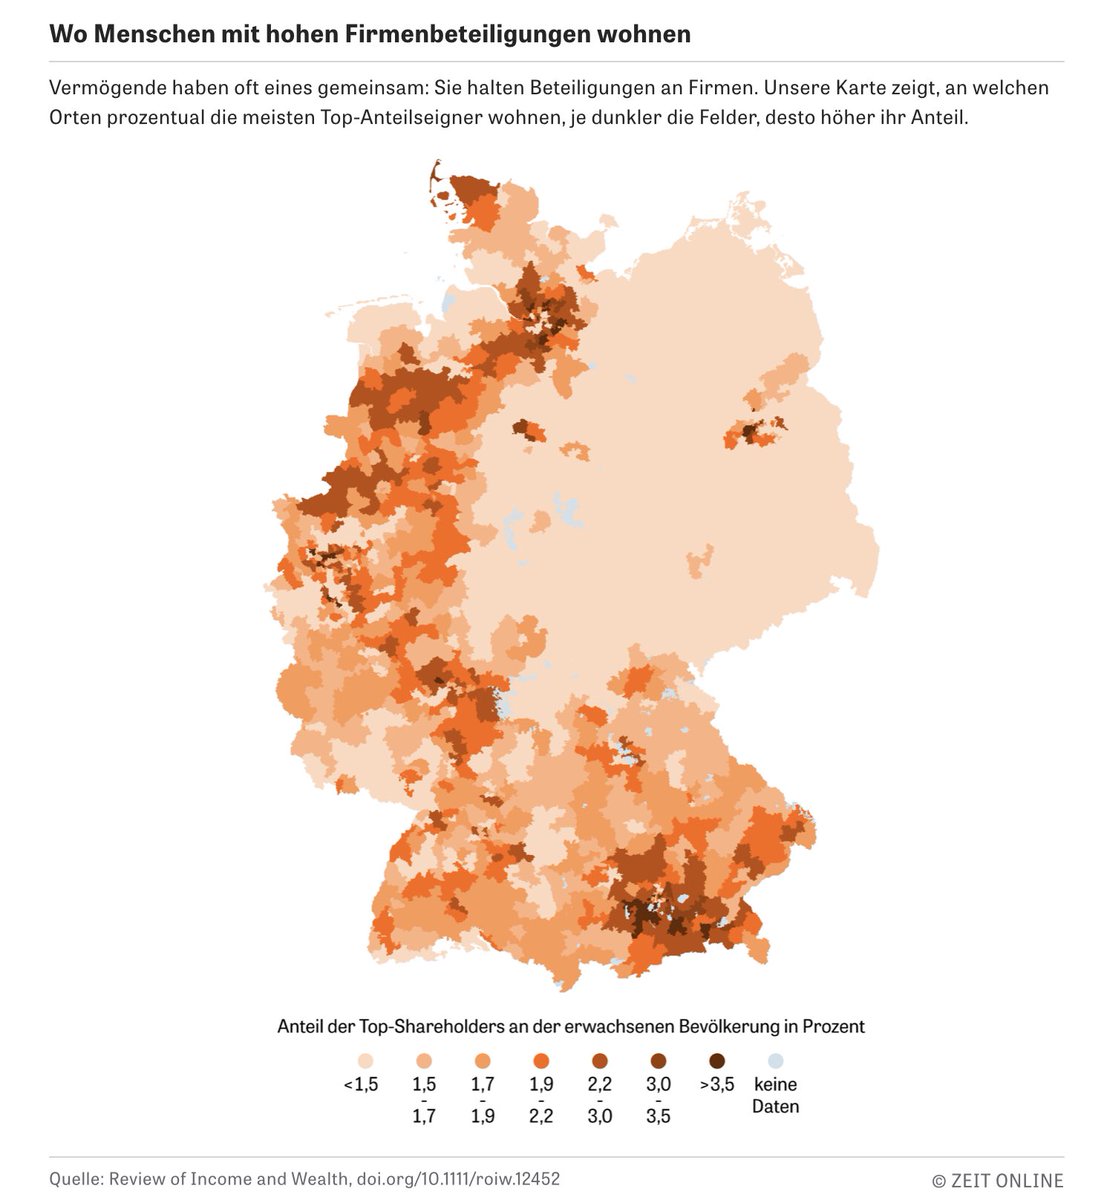 Facts on wealth in Germany #8:Wealth is distributed very unequally geographically within Germany – as this graph shows for equity ownership of companies. This graph comes from the excellent reporting by  @zeitonline on our new study on wealth in Germany.